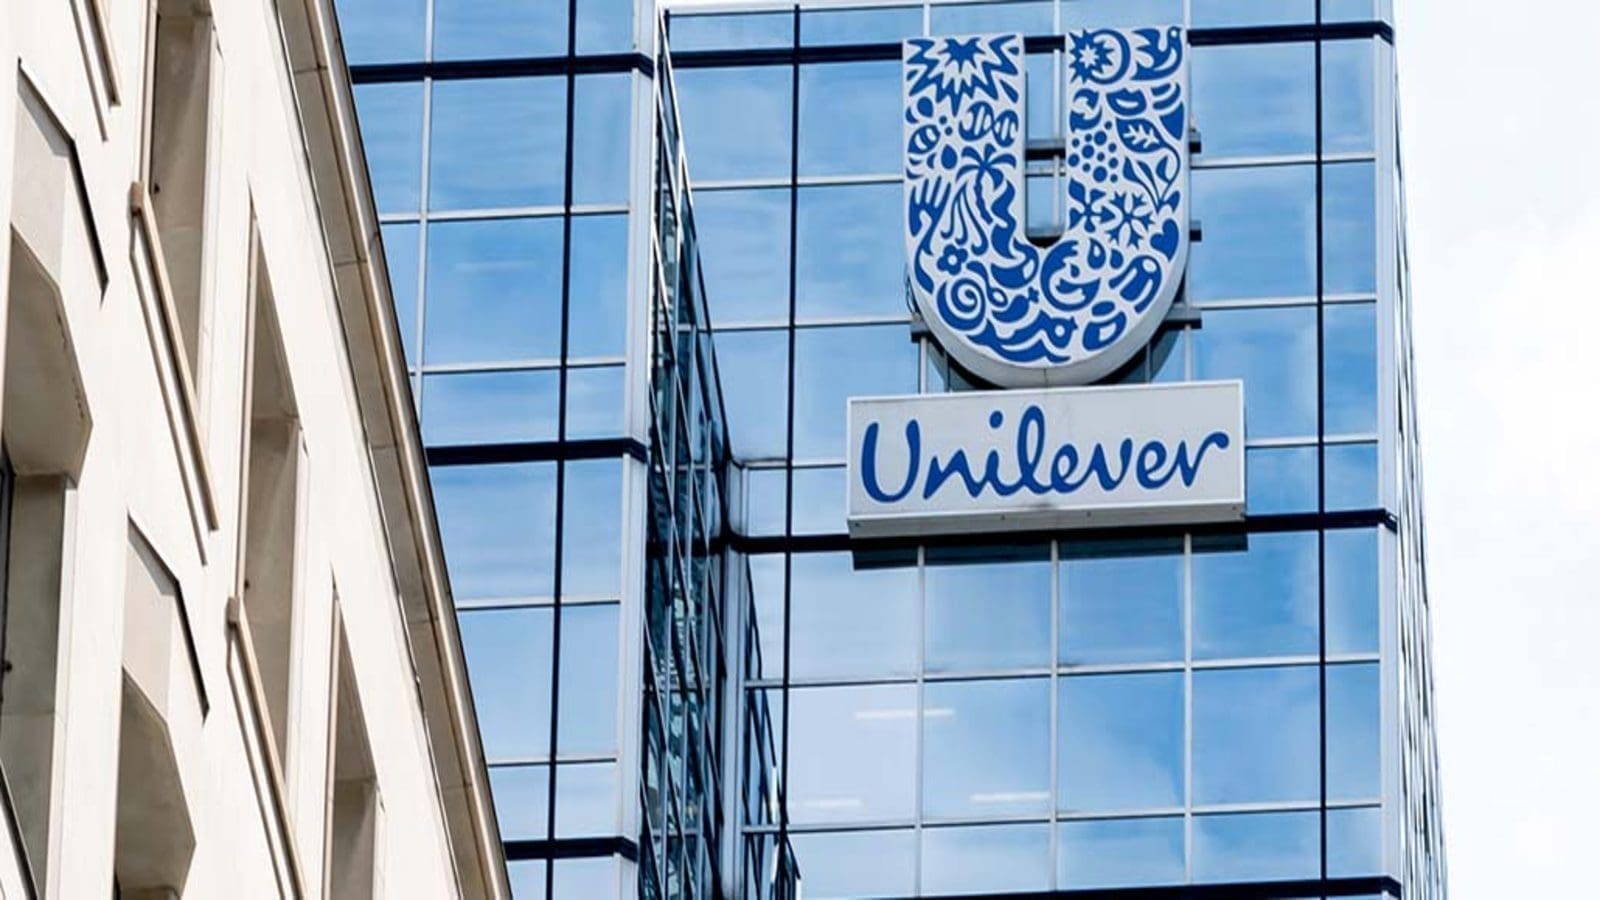 Unilever Nigeria Plc achieves strong financial performance with a surge in revenue